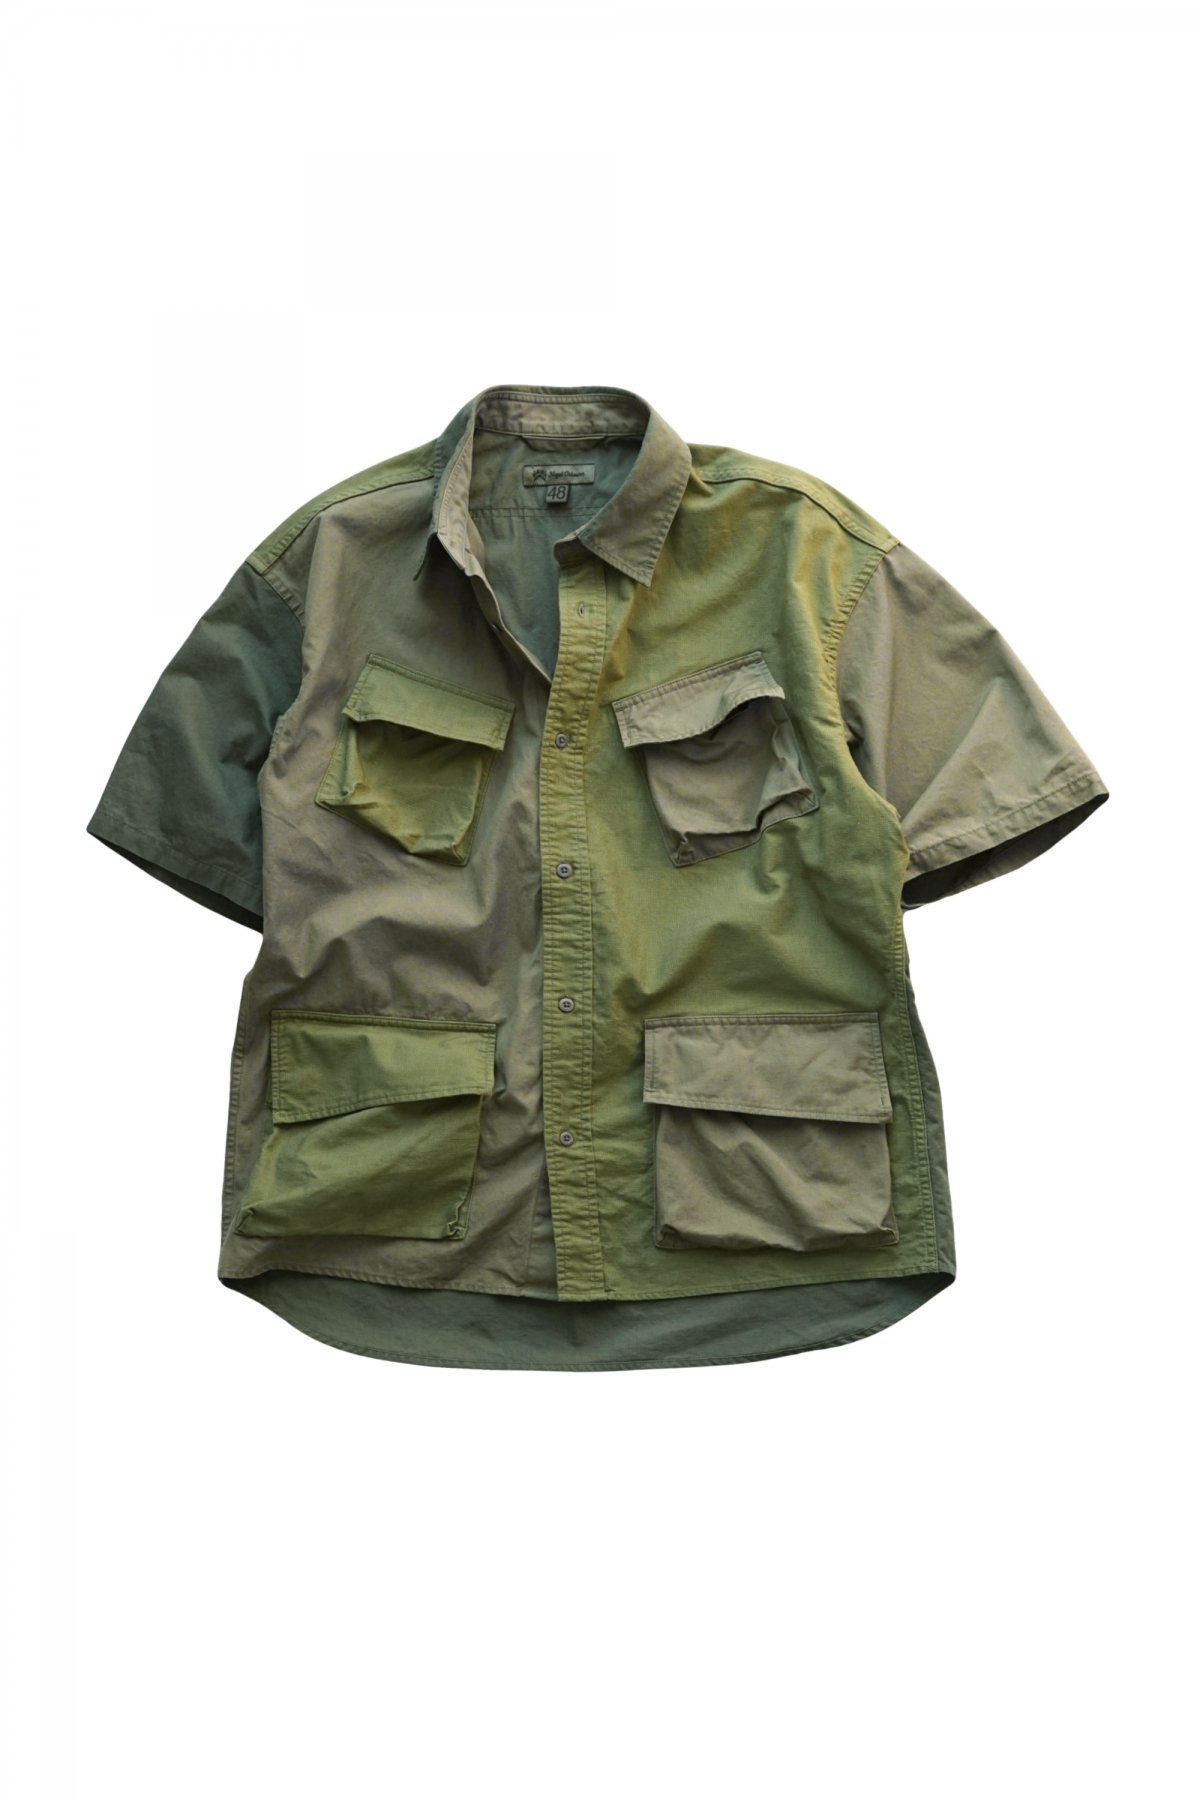 Nigel Cabourn - DESERT ARMY SHIRT S/S - OLIVE